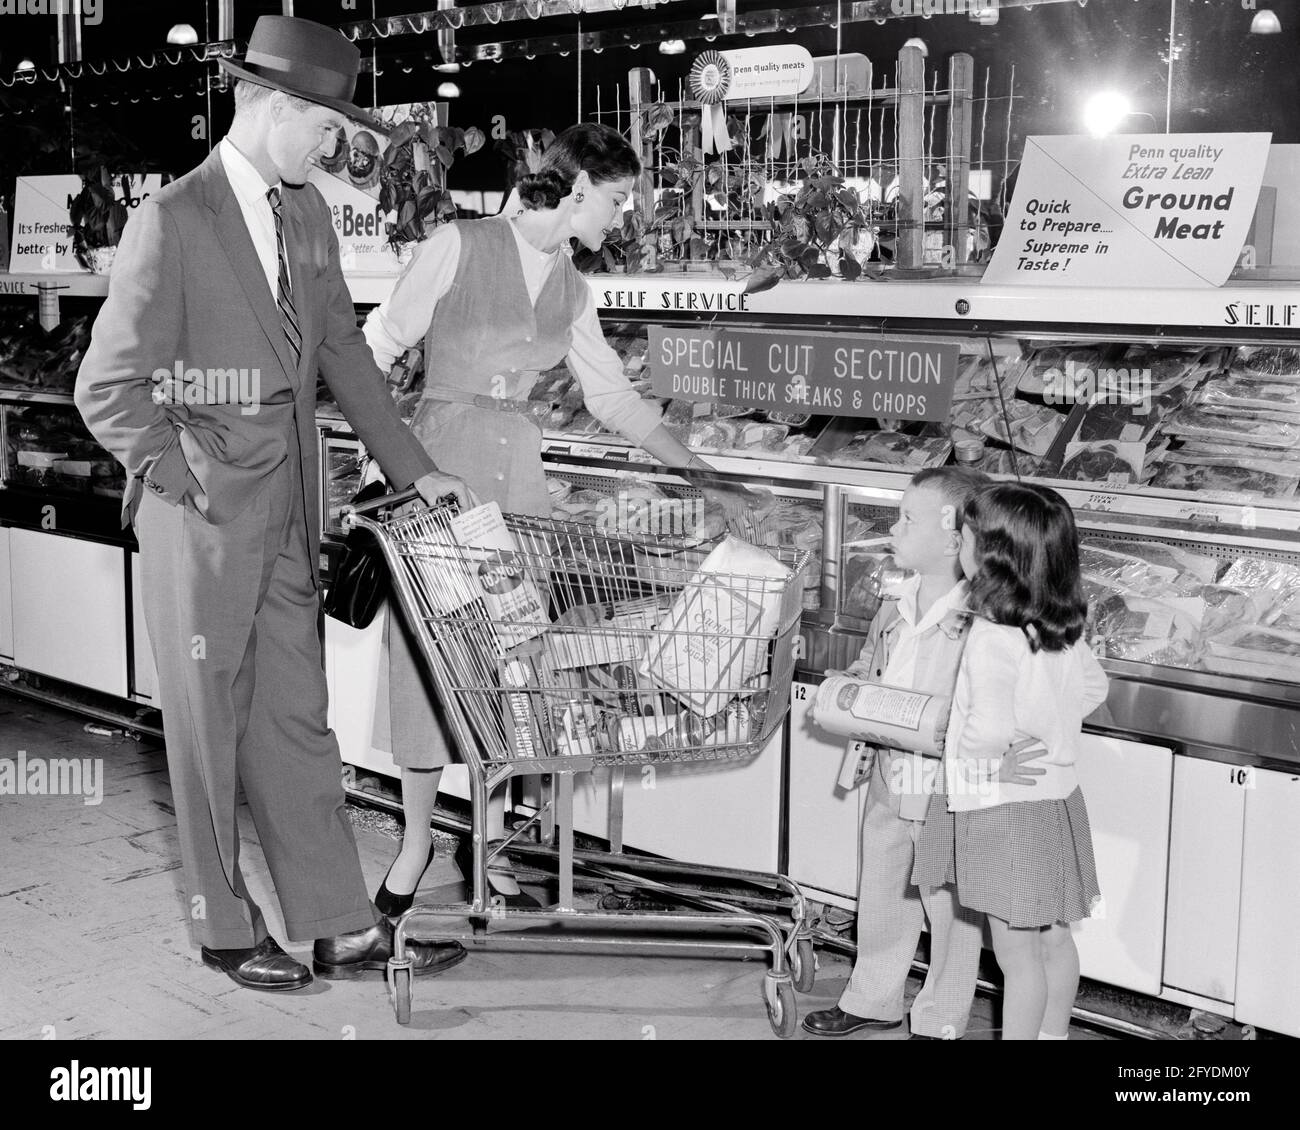 1950s FAMILY OF FOUR SHOPPING IN GROCERY STORE WITH CART AT MEAT COUNTER MOTHER FATHER WITH SON AND DAUGHTER - s7018 HAR001 HARS NOSTALGIC PAIR 4 SUBURBAN URBAN CART GROCERIES MOTHERS OLD TIME NOSTALGIA BROTHER OLD FASHION SISTER 1 JUVENILE SONS FAMILIES LIFESTYLE FEMALES MARRIED BROTHERS SPOUSE HUSBANDS COPY SPACE FULL-LENGTH LADIES DAUGHTERS PERSONS MALES MEAT SIBLINGS SISTERS FATHERS B&W PARTNER SHOPPER SHOPPERS SUIT AND TIE AND CHOICE DADS SIBLING STYLISH COOPERATION GROWTH JUVENILES MID-ADULT MID-ADULT MAN MID-ADULT WOMAN MOMS TOGETHERNESS WIVES BLACK AND WHITE CAUCASIAN ETHNICITY HAR001 Stock Photo